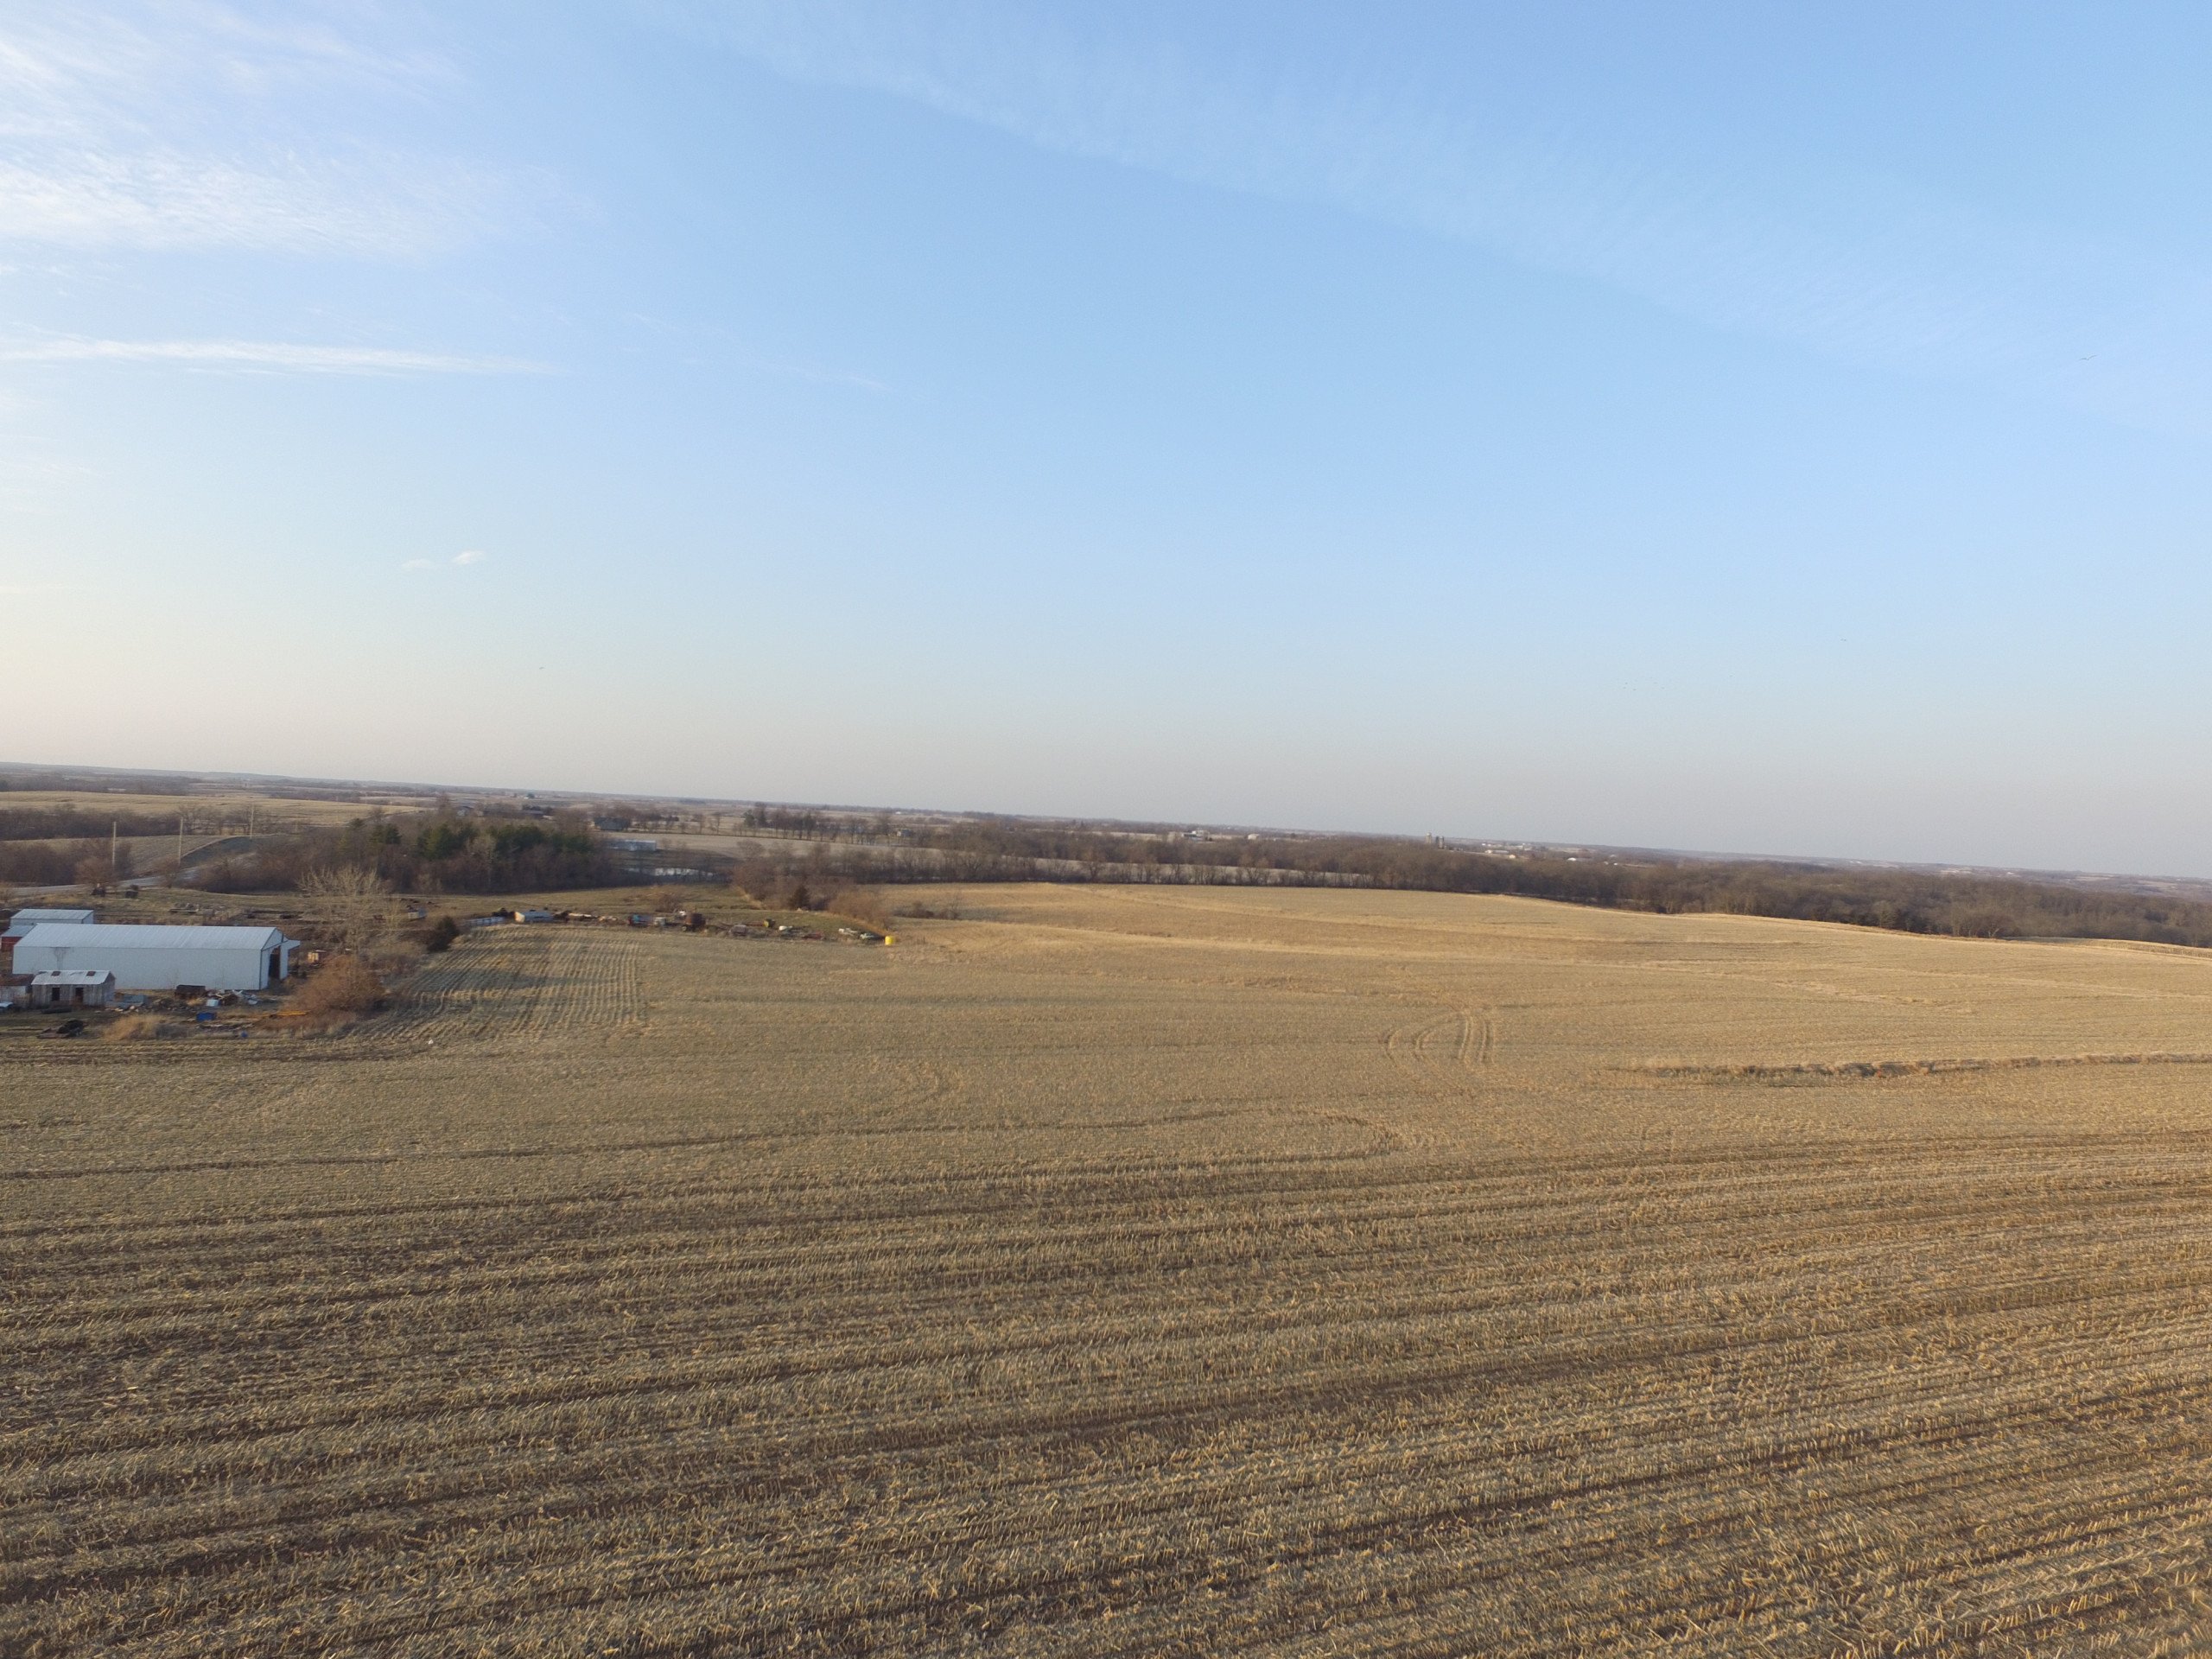 land-marion-county-iowa-86-acres-listing-number-16742-DJI_0020 - Copy-3.jpg